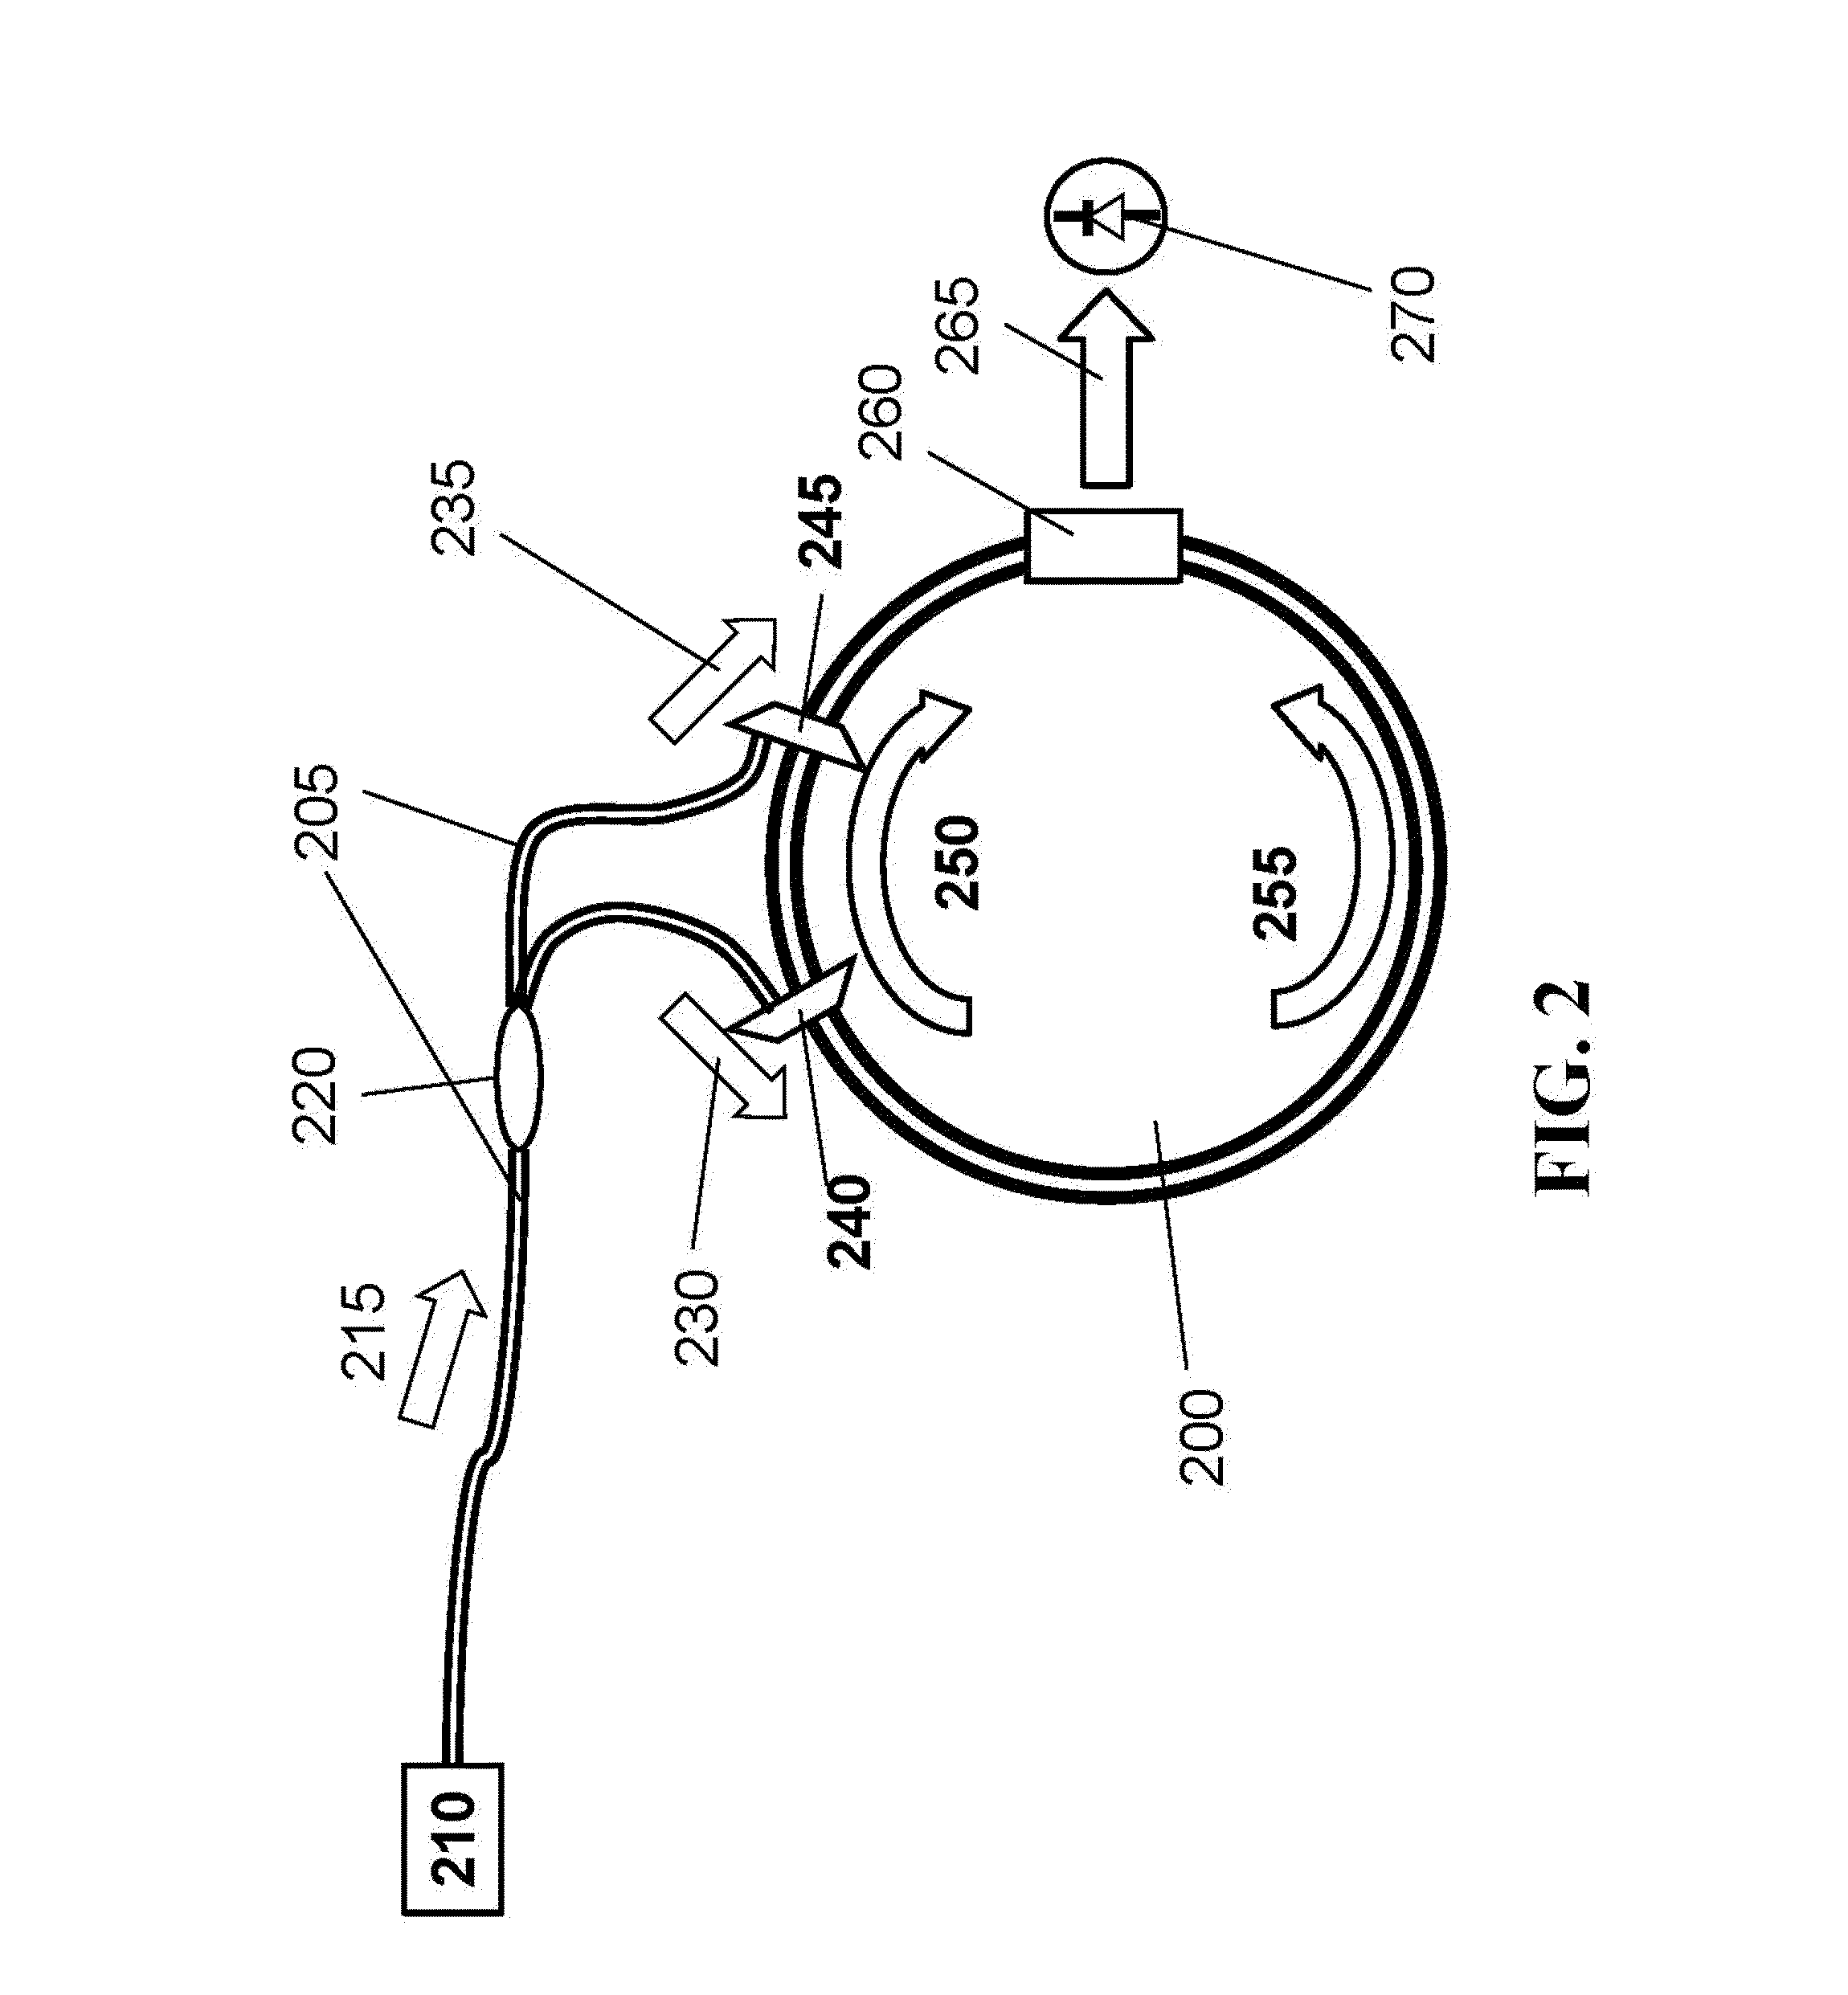 System and method for increasing sensitivity of optical sensors